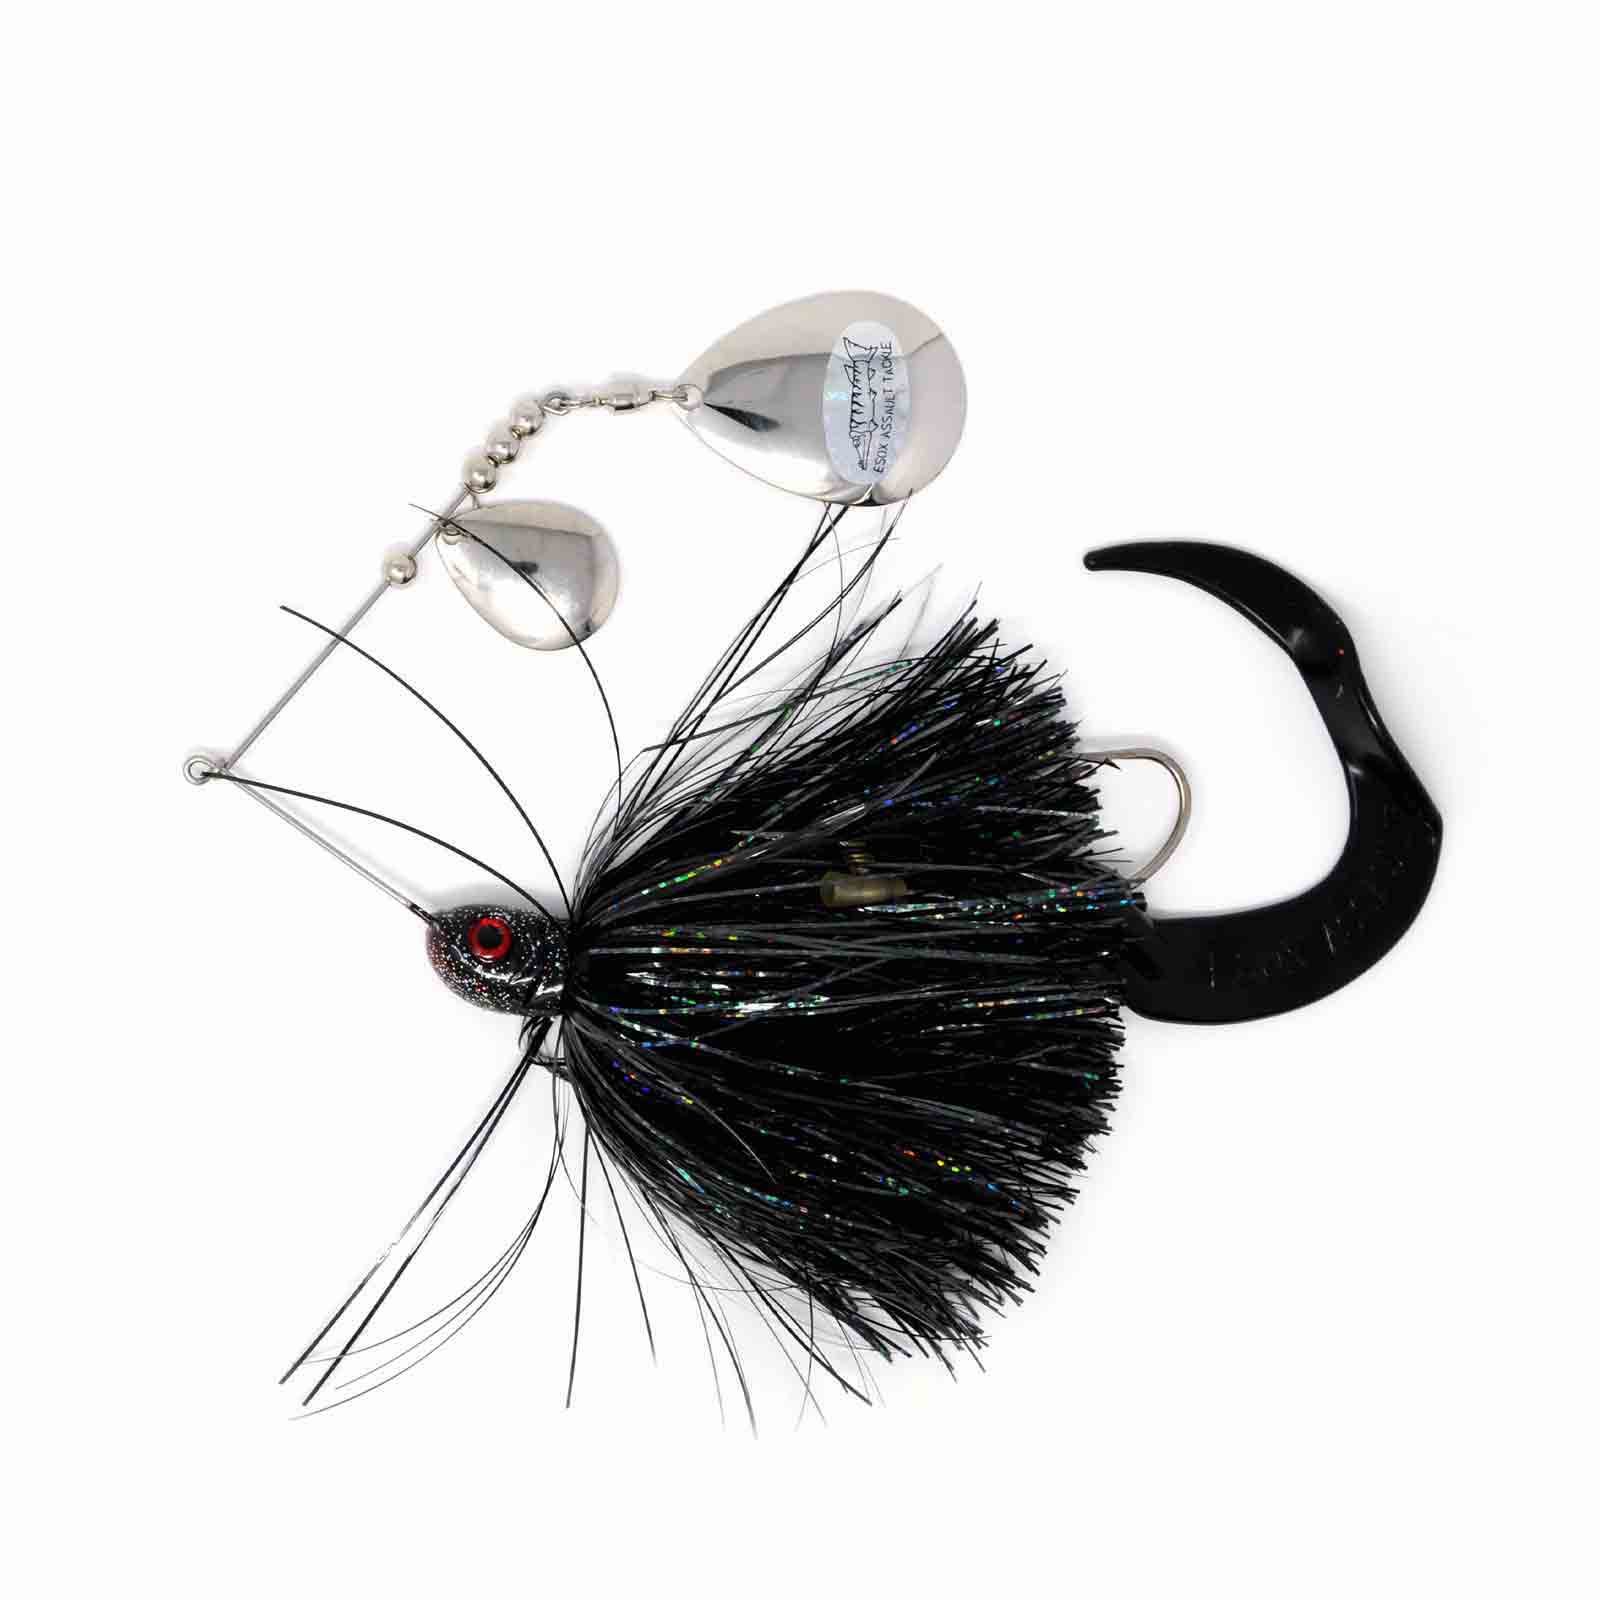 View of Spinnerbaits Esox Assault Spinnerbait Colorado 1.5oz Black / Nickel available at EZOKO Pike and Musky Shop